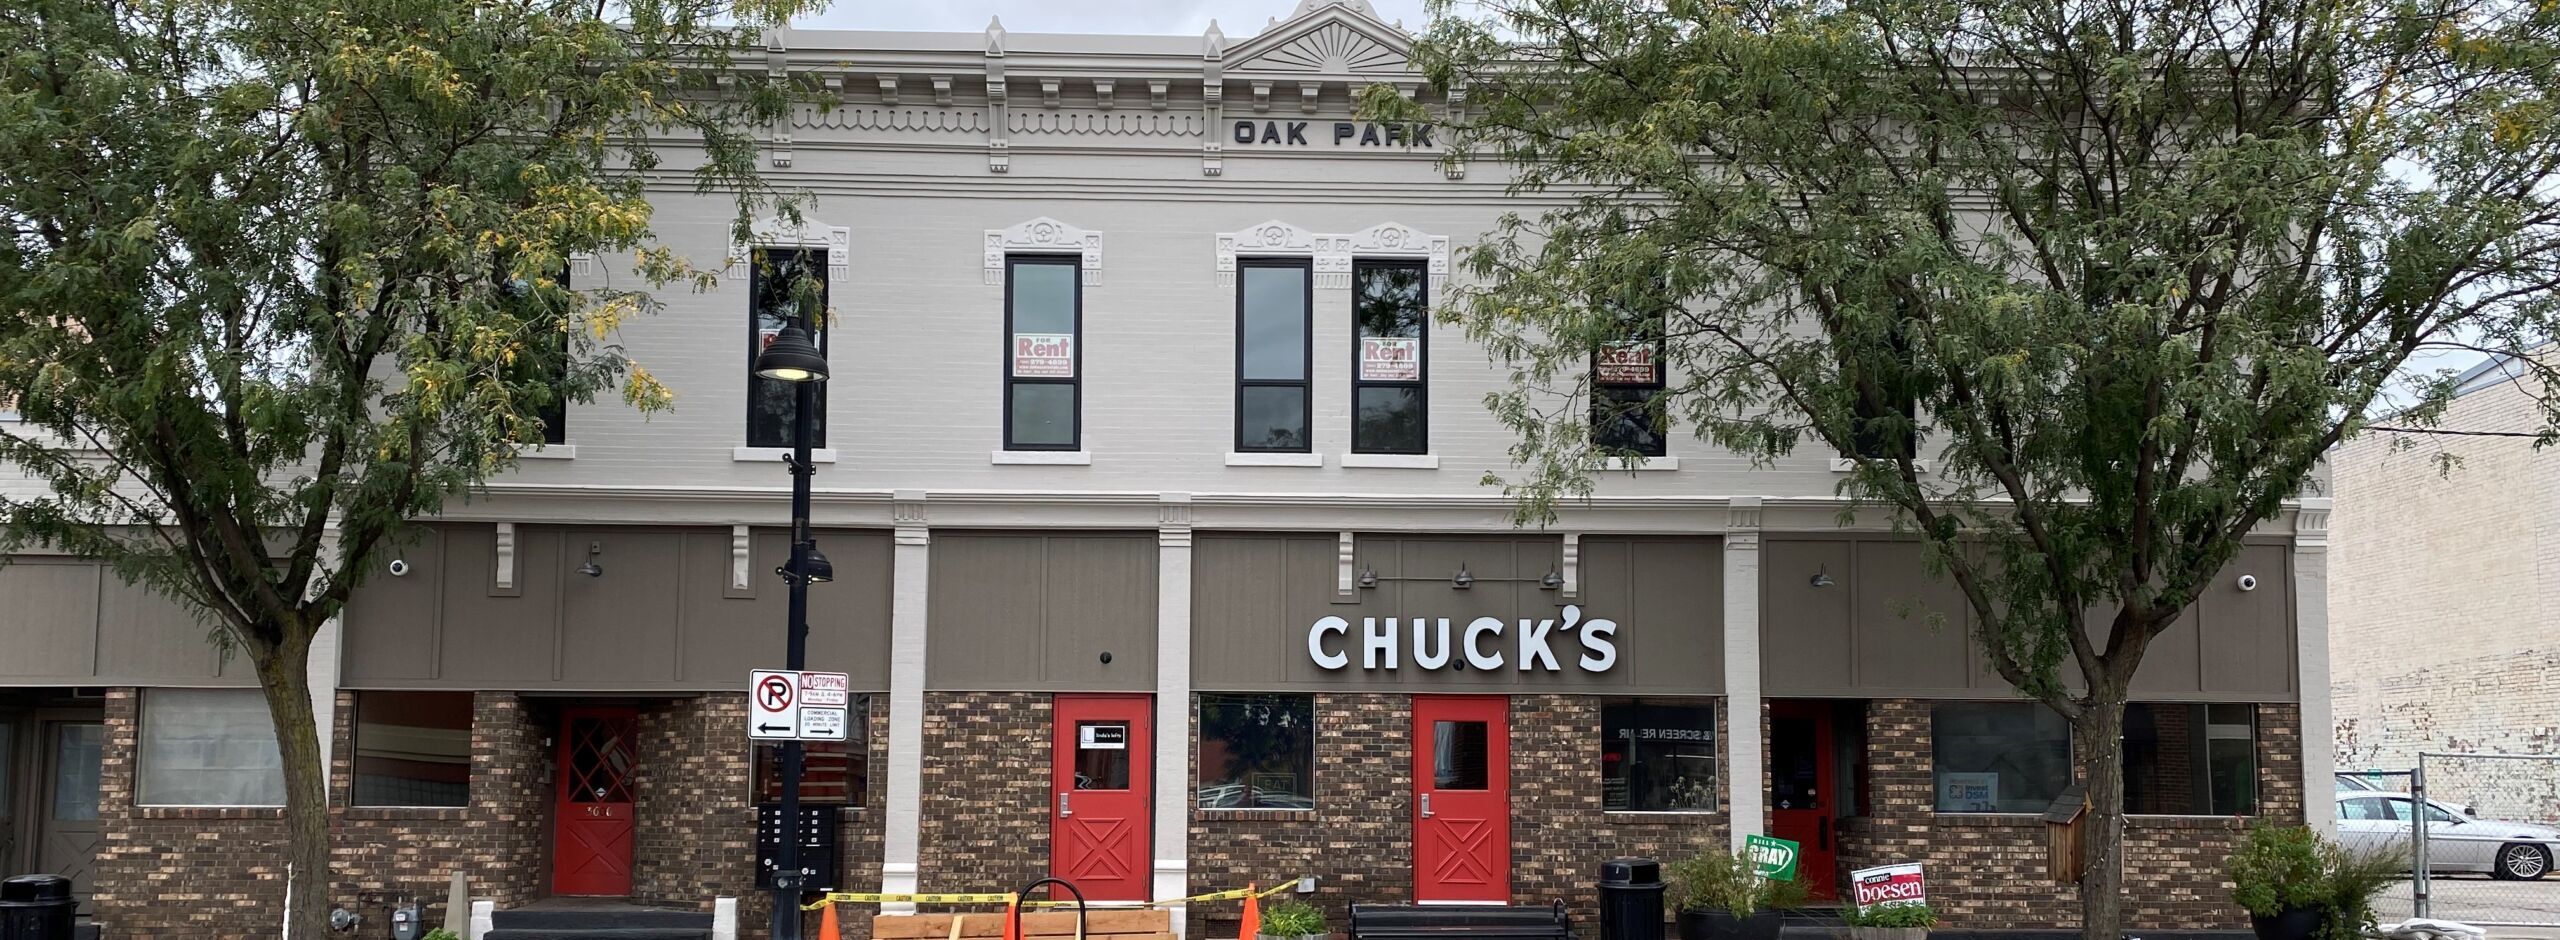 Updated exterior of Chuck's Restaurant in the Highland Park neighborhood of Des Moines